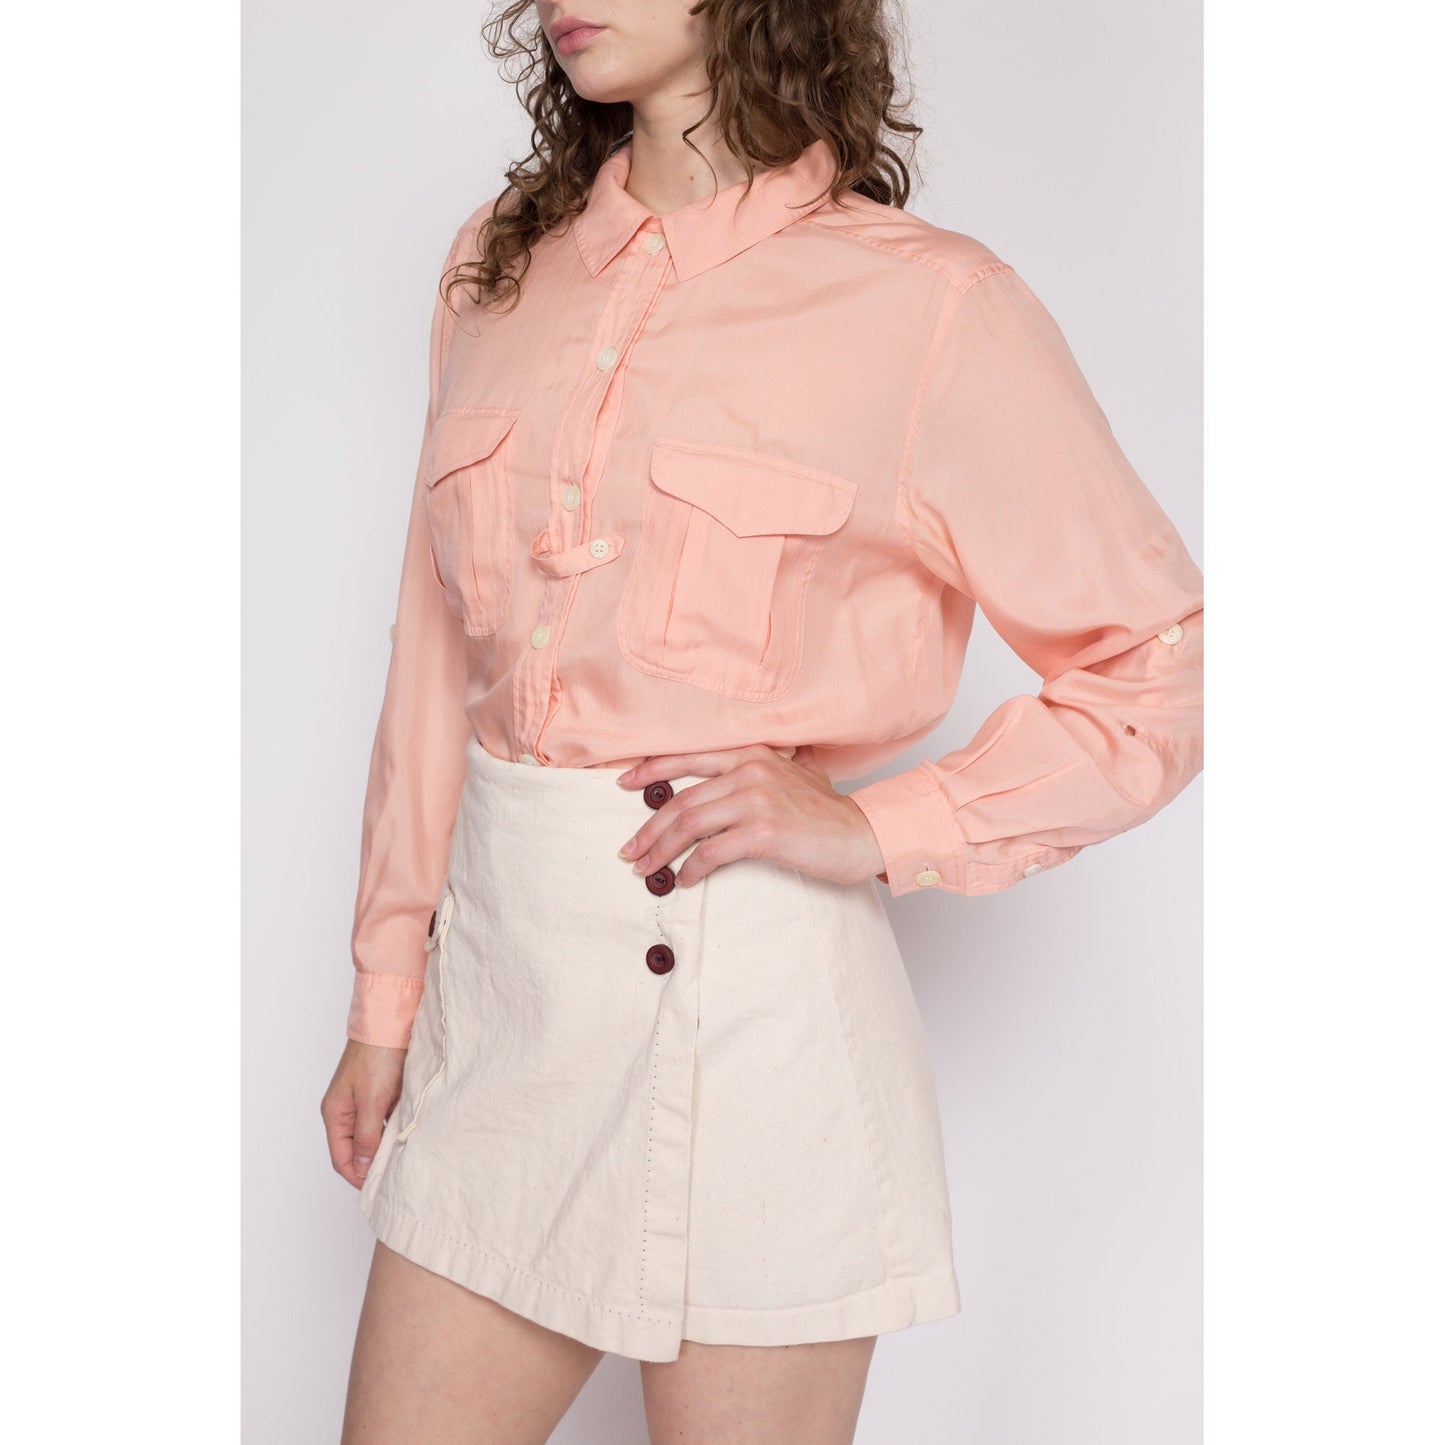 L| 80s Peach Silk Blend Cuffed Sleeve Blouse - Large | Vintage Minimalist Oversize Long Sleeve Button Up Collared Shirt